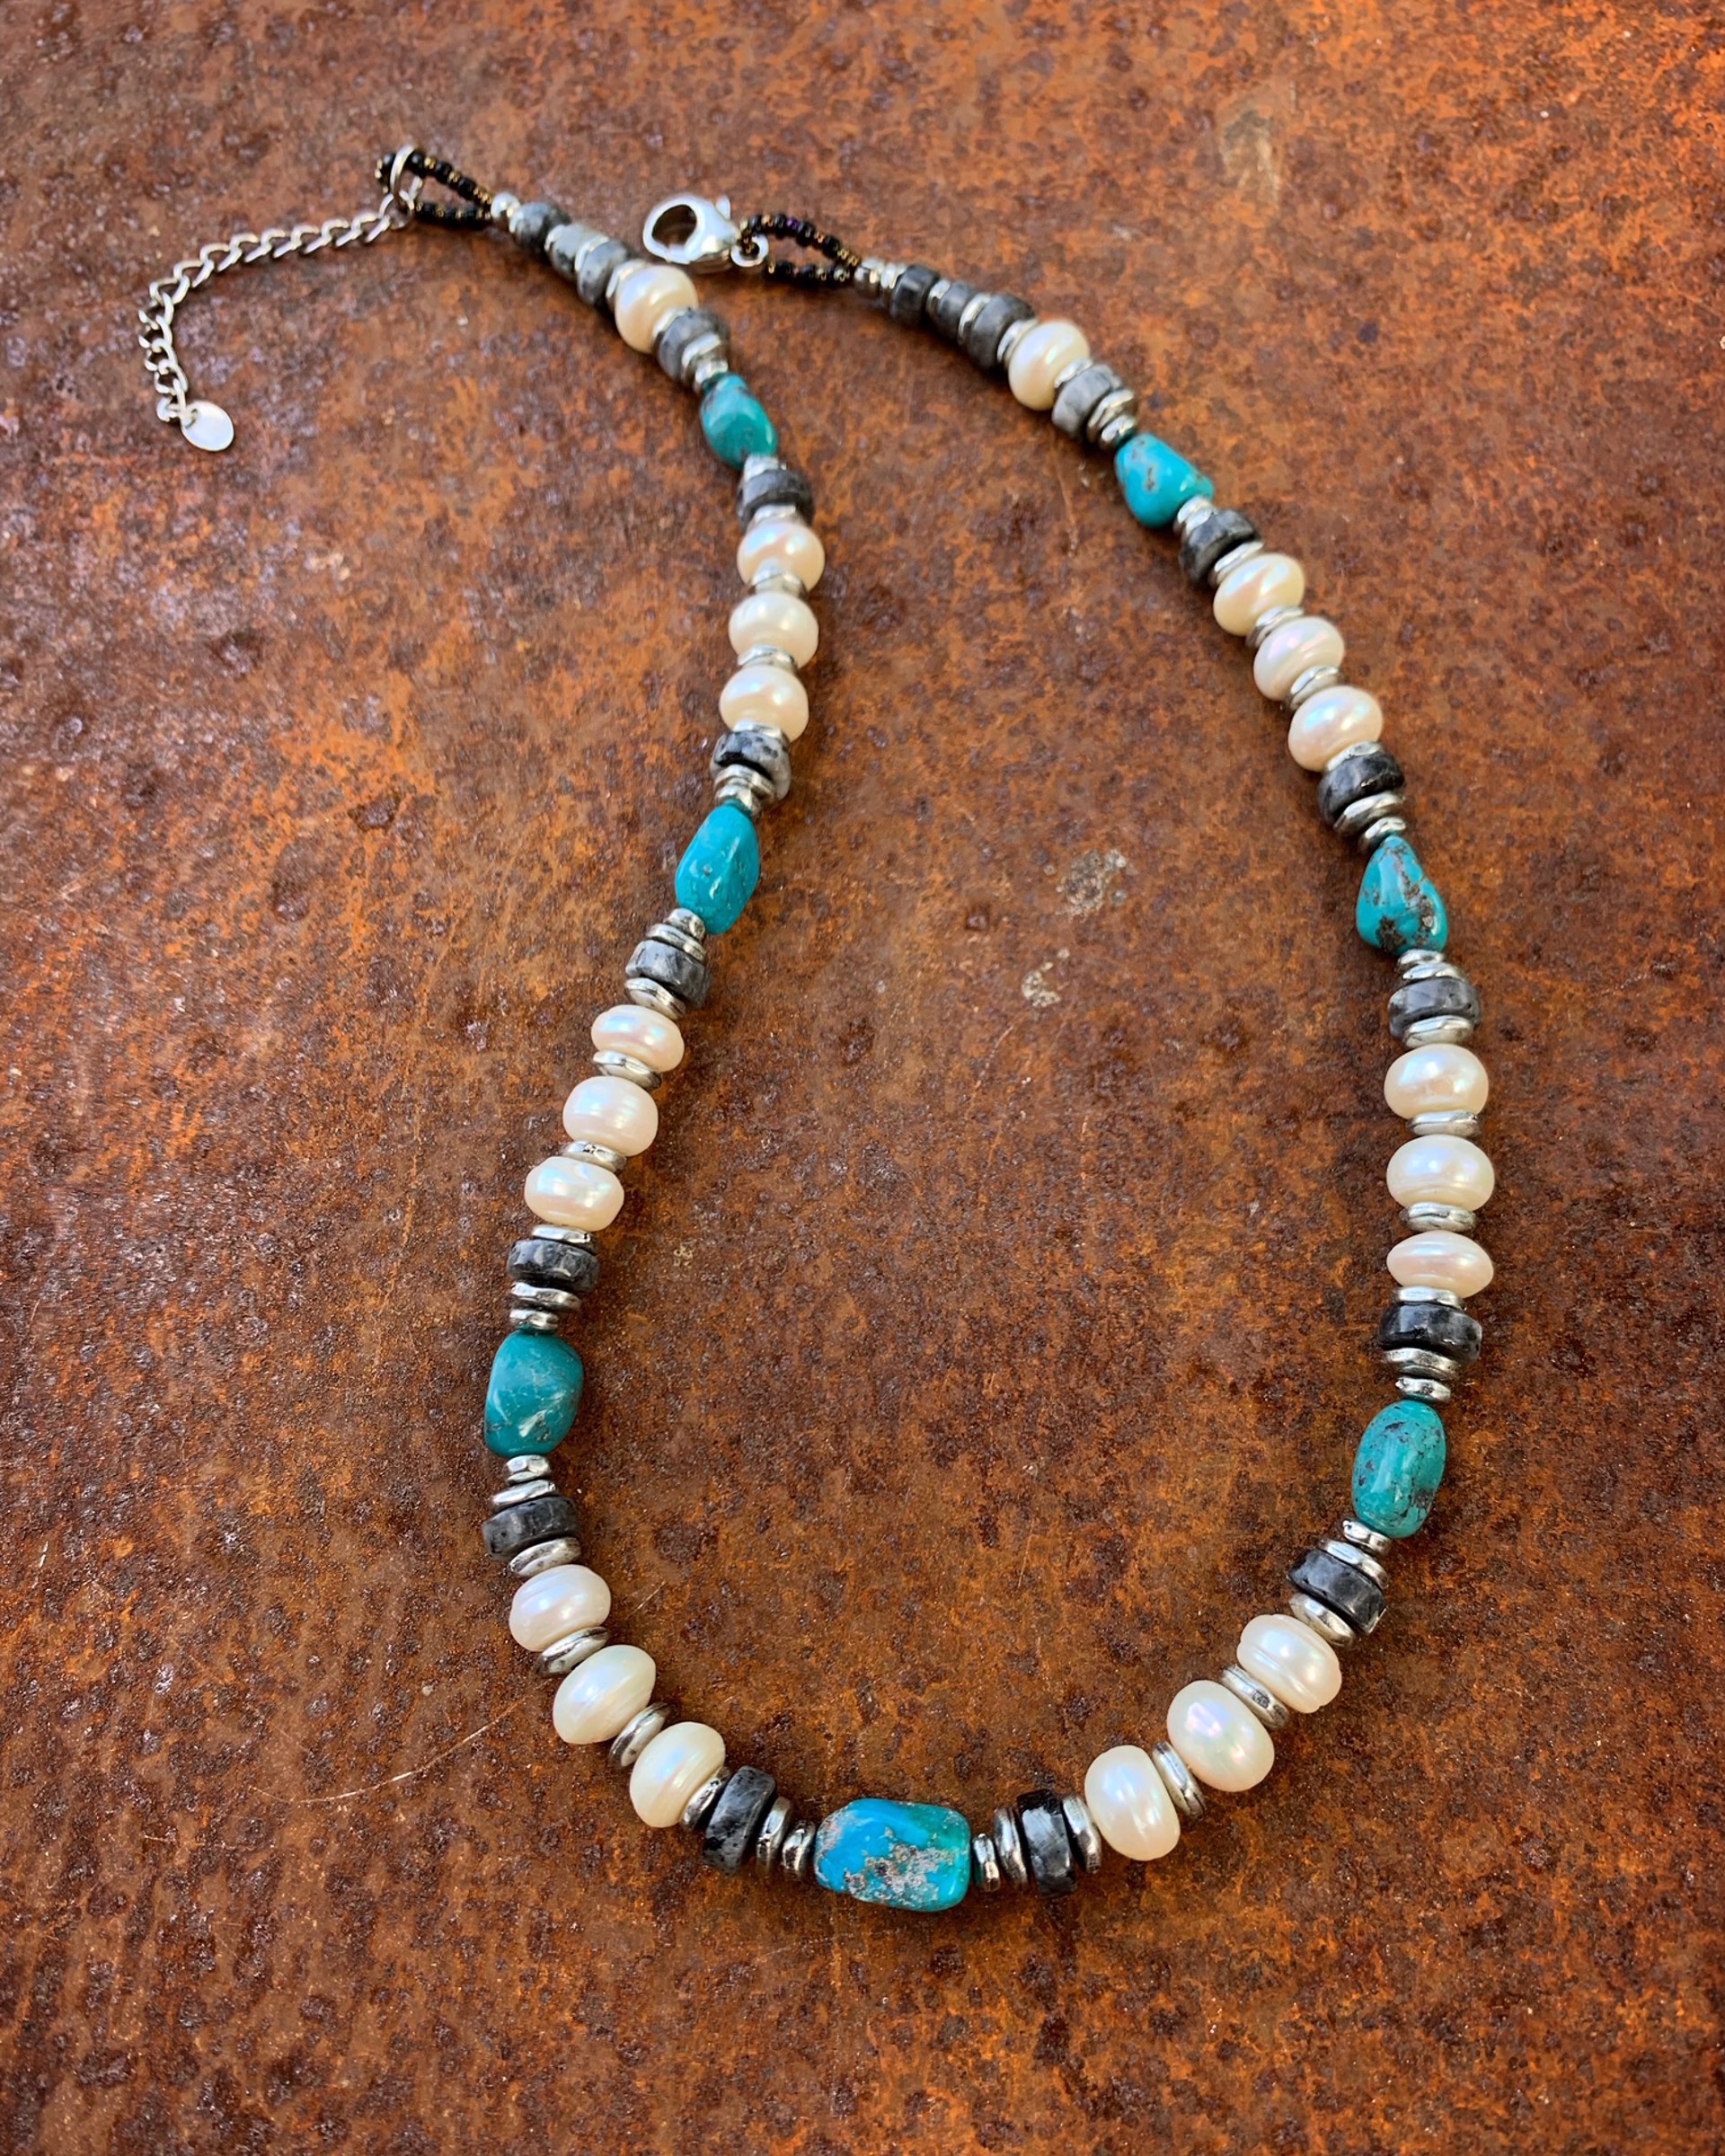 K818 Cultured Pearls and Turquoise by Kelly Ormsby